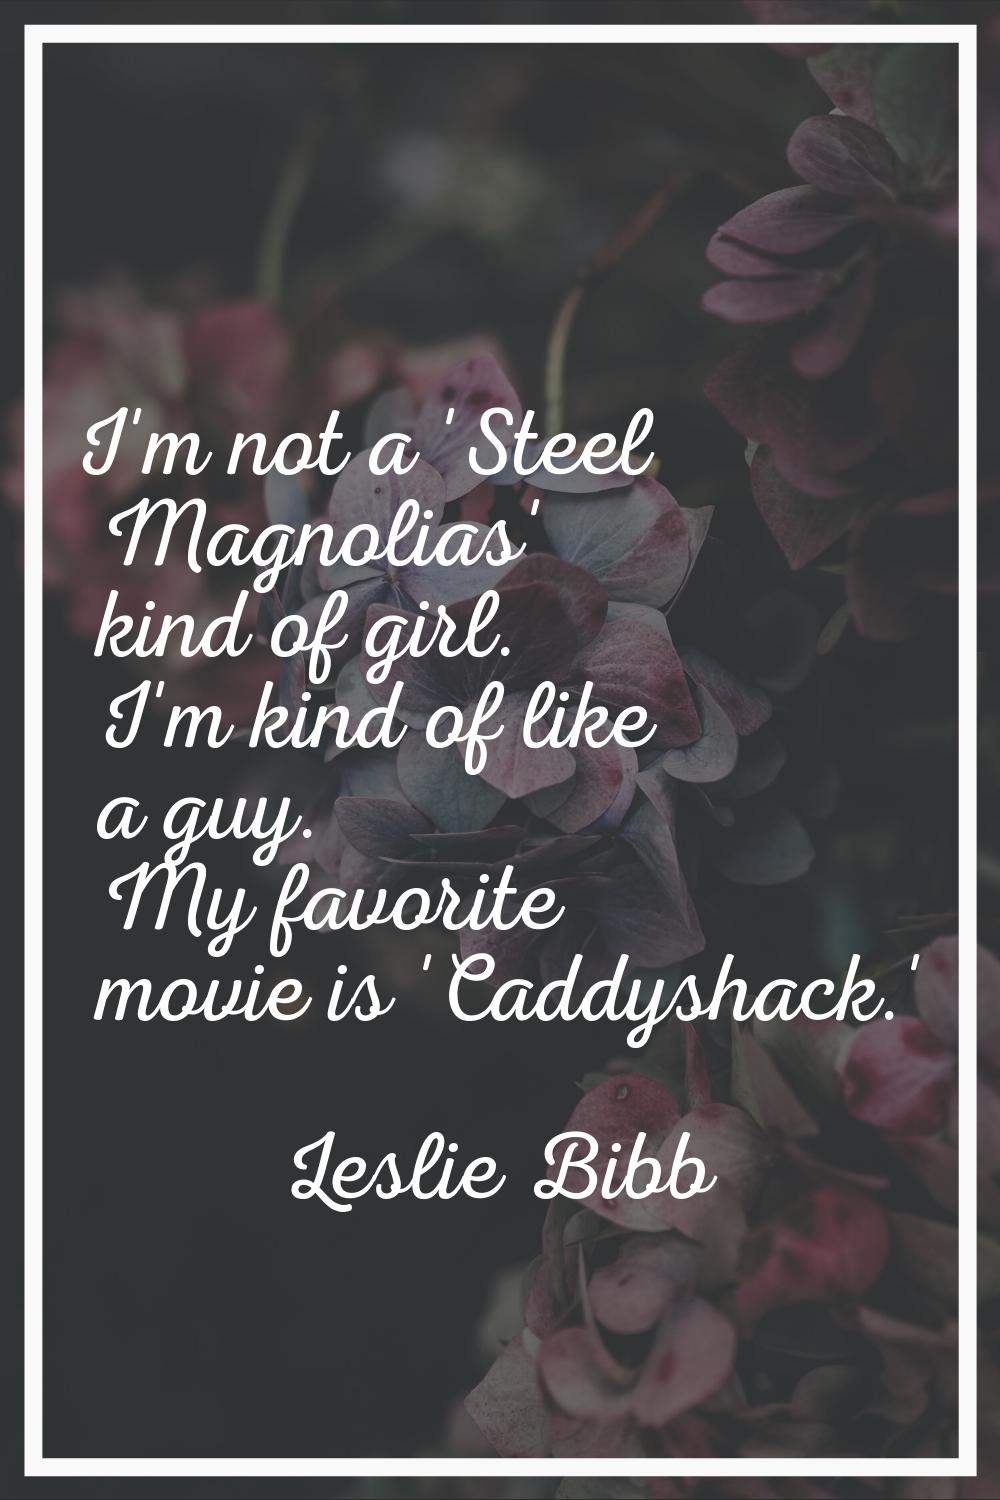 I'm not a 'Steel Magnolias' kind of girl. I'm kind of like a guy. My favorite movie is 'Caddyshack.